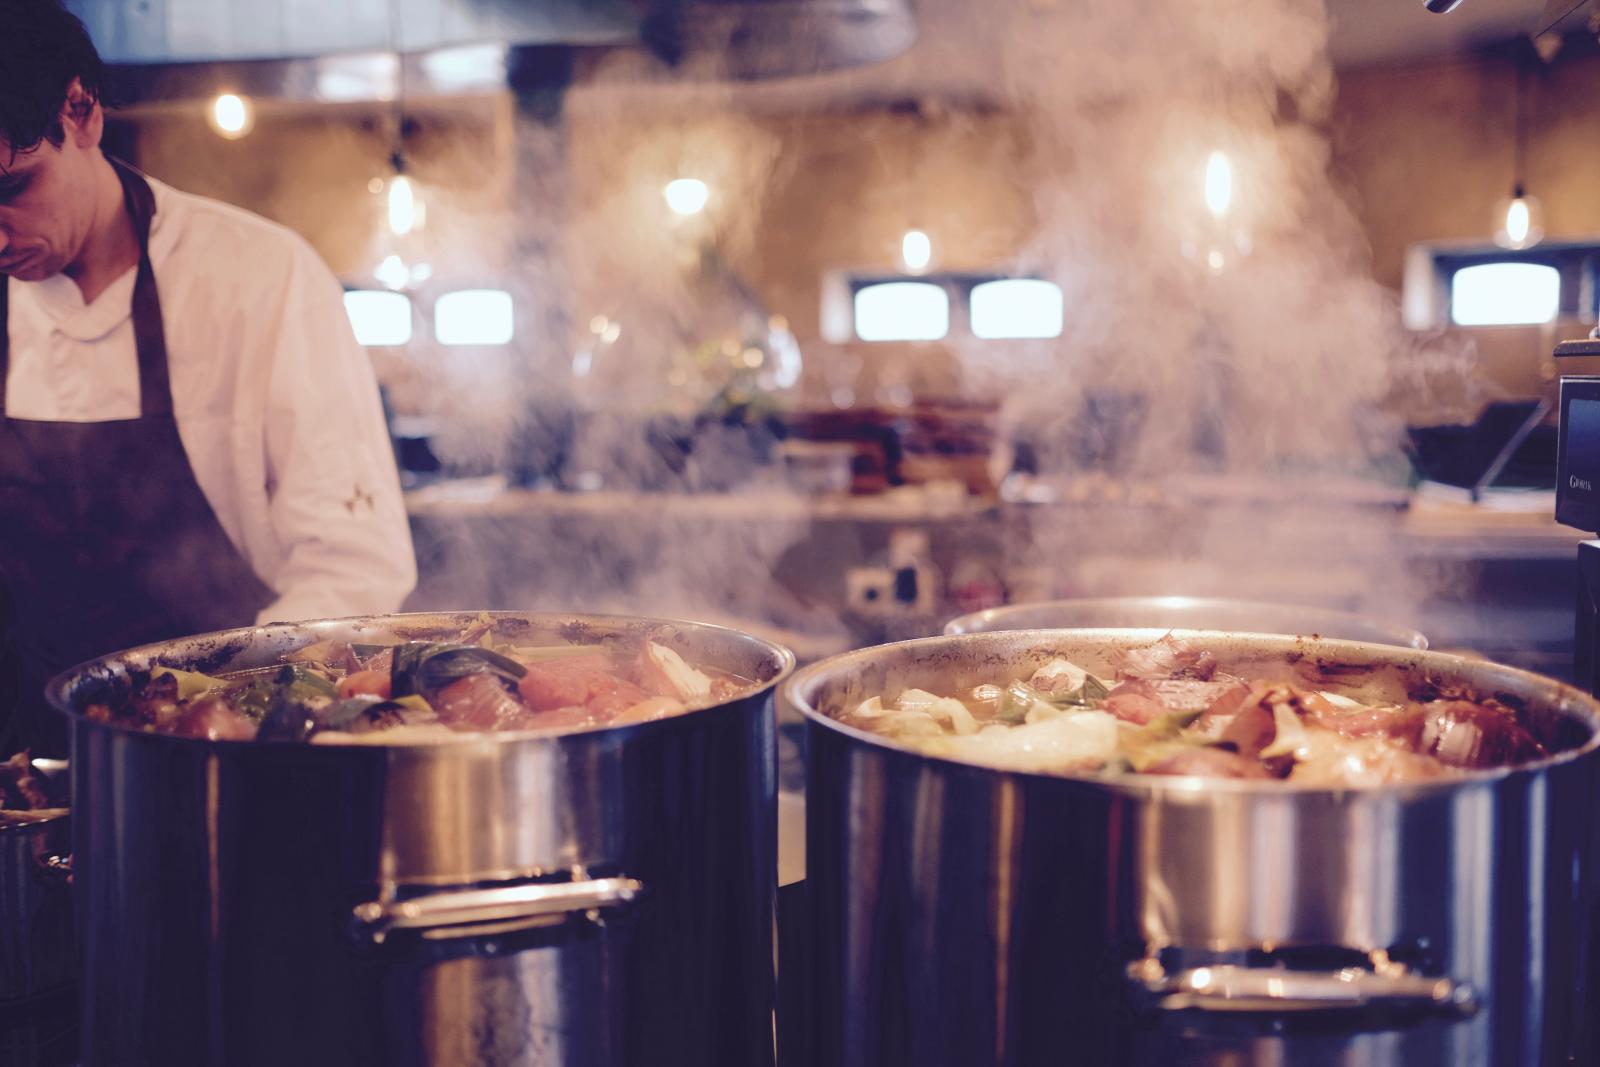 Chef cooking in kitchen. Photo credit: Pexels